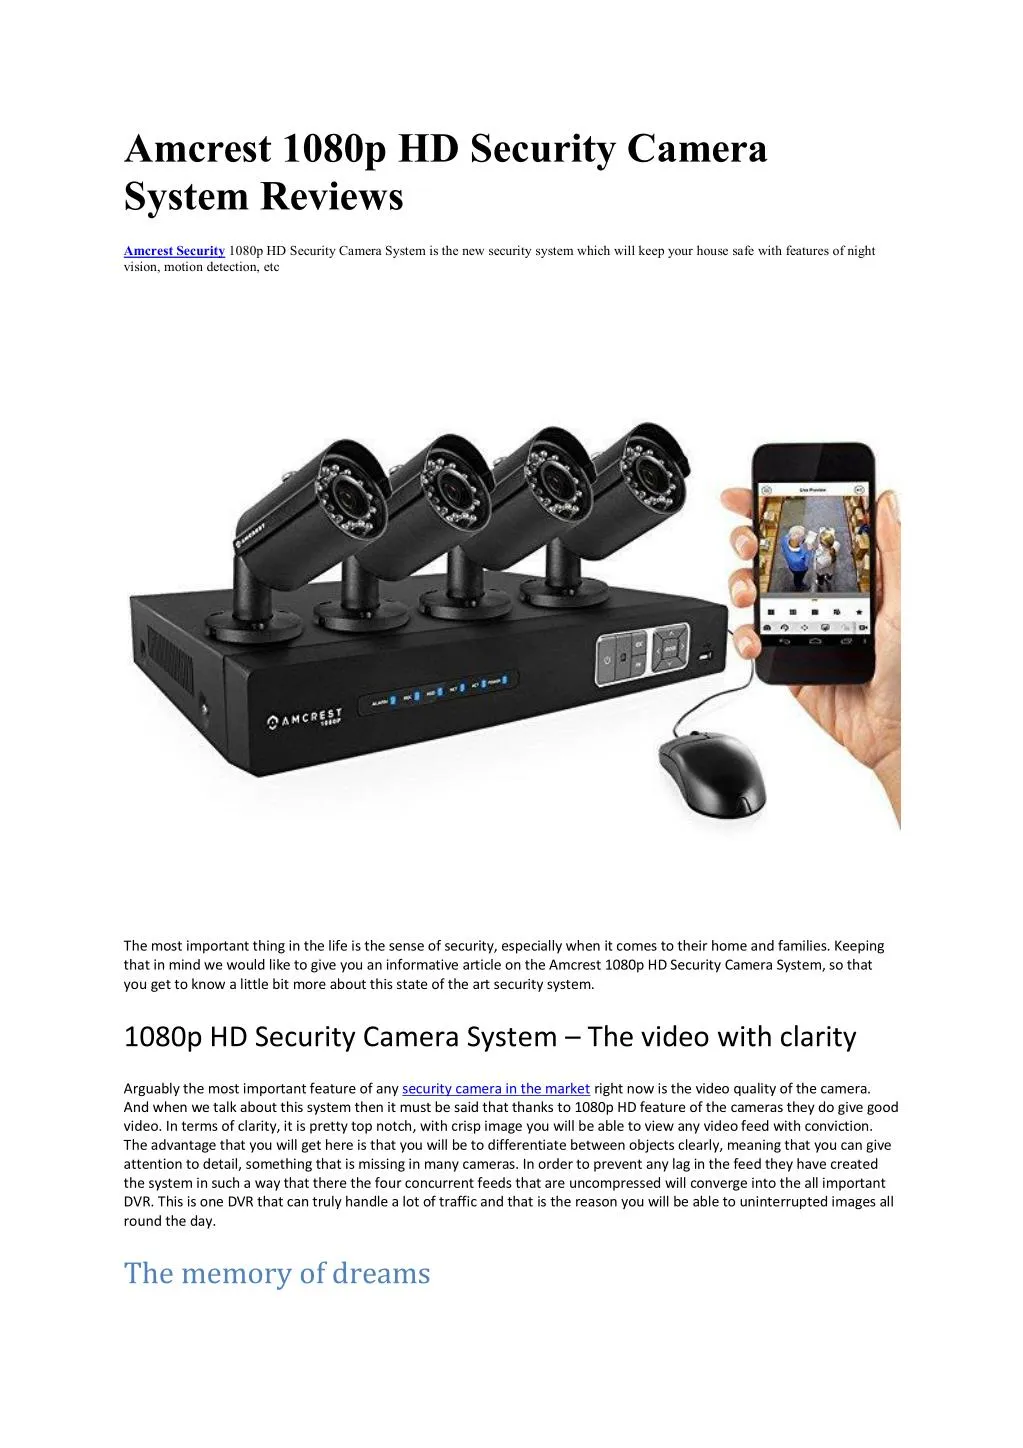 amcrest 1080p hd security camera system reviews